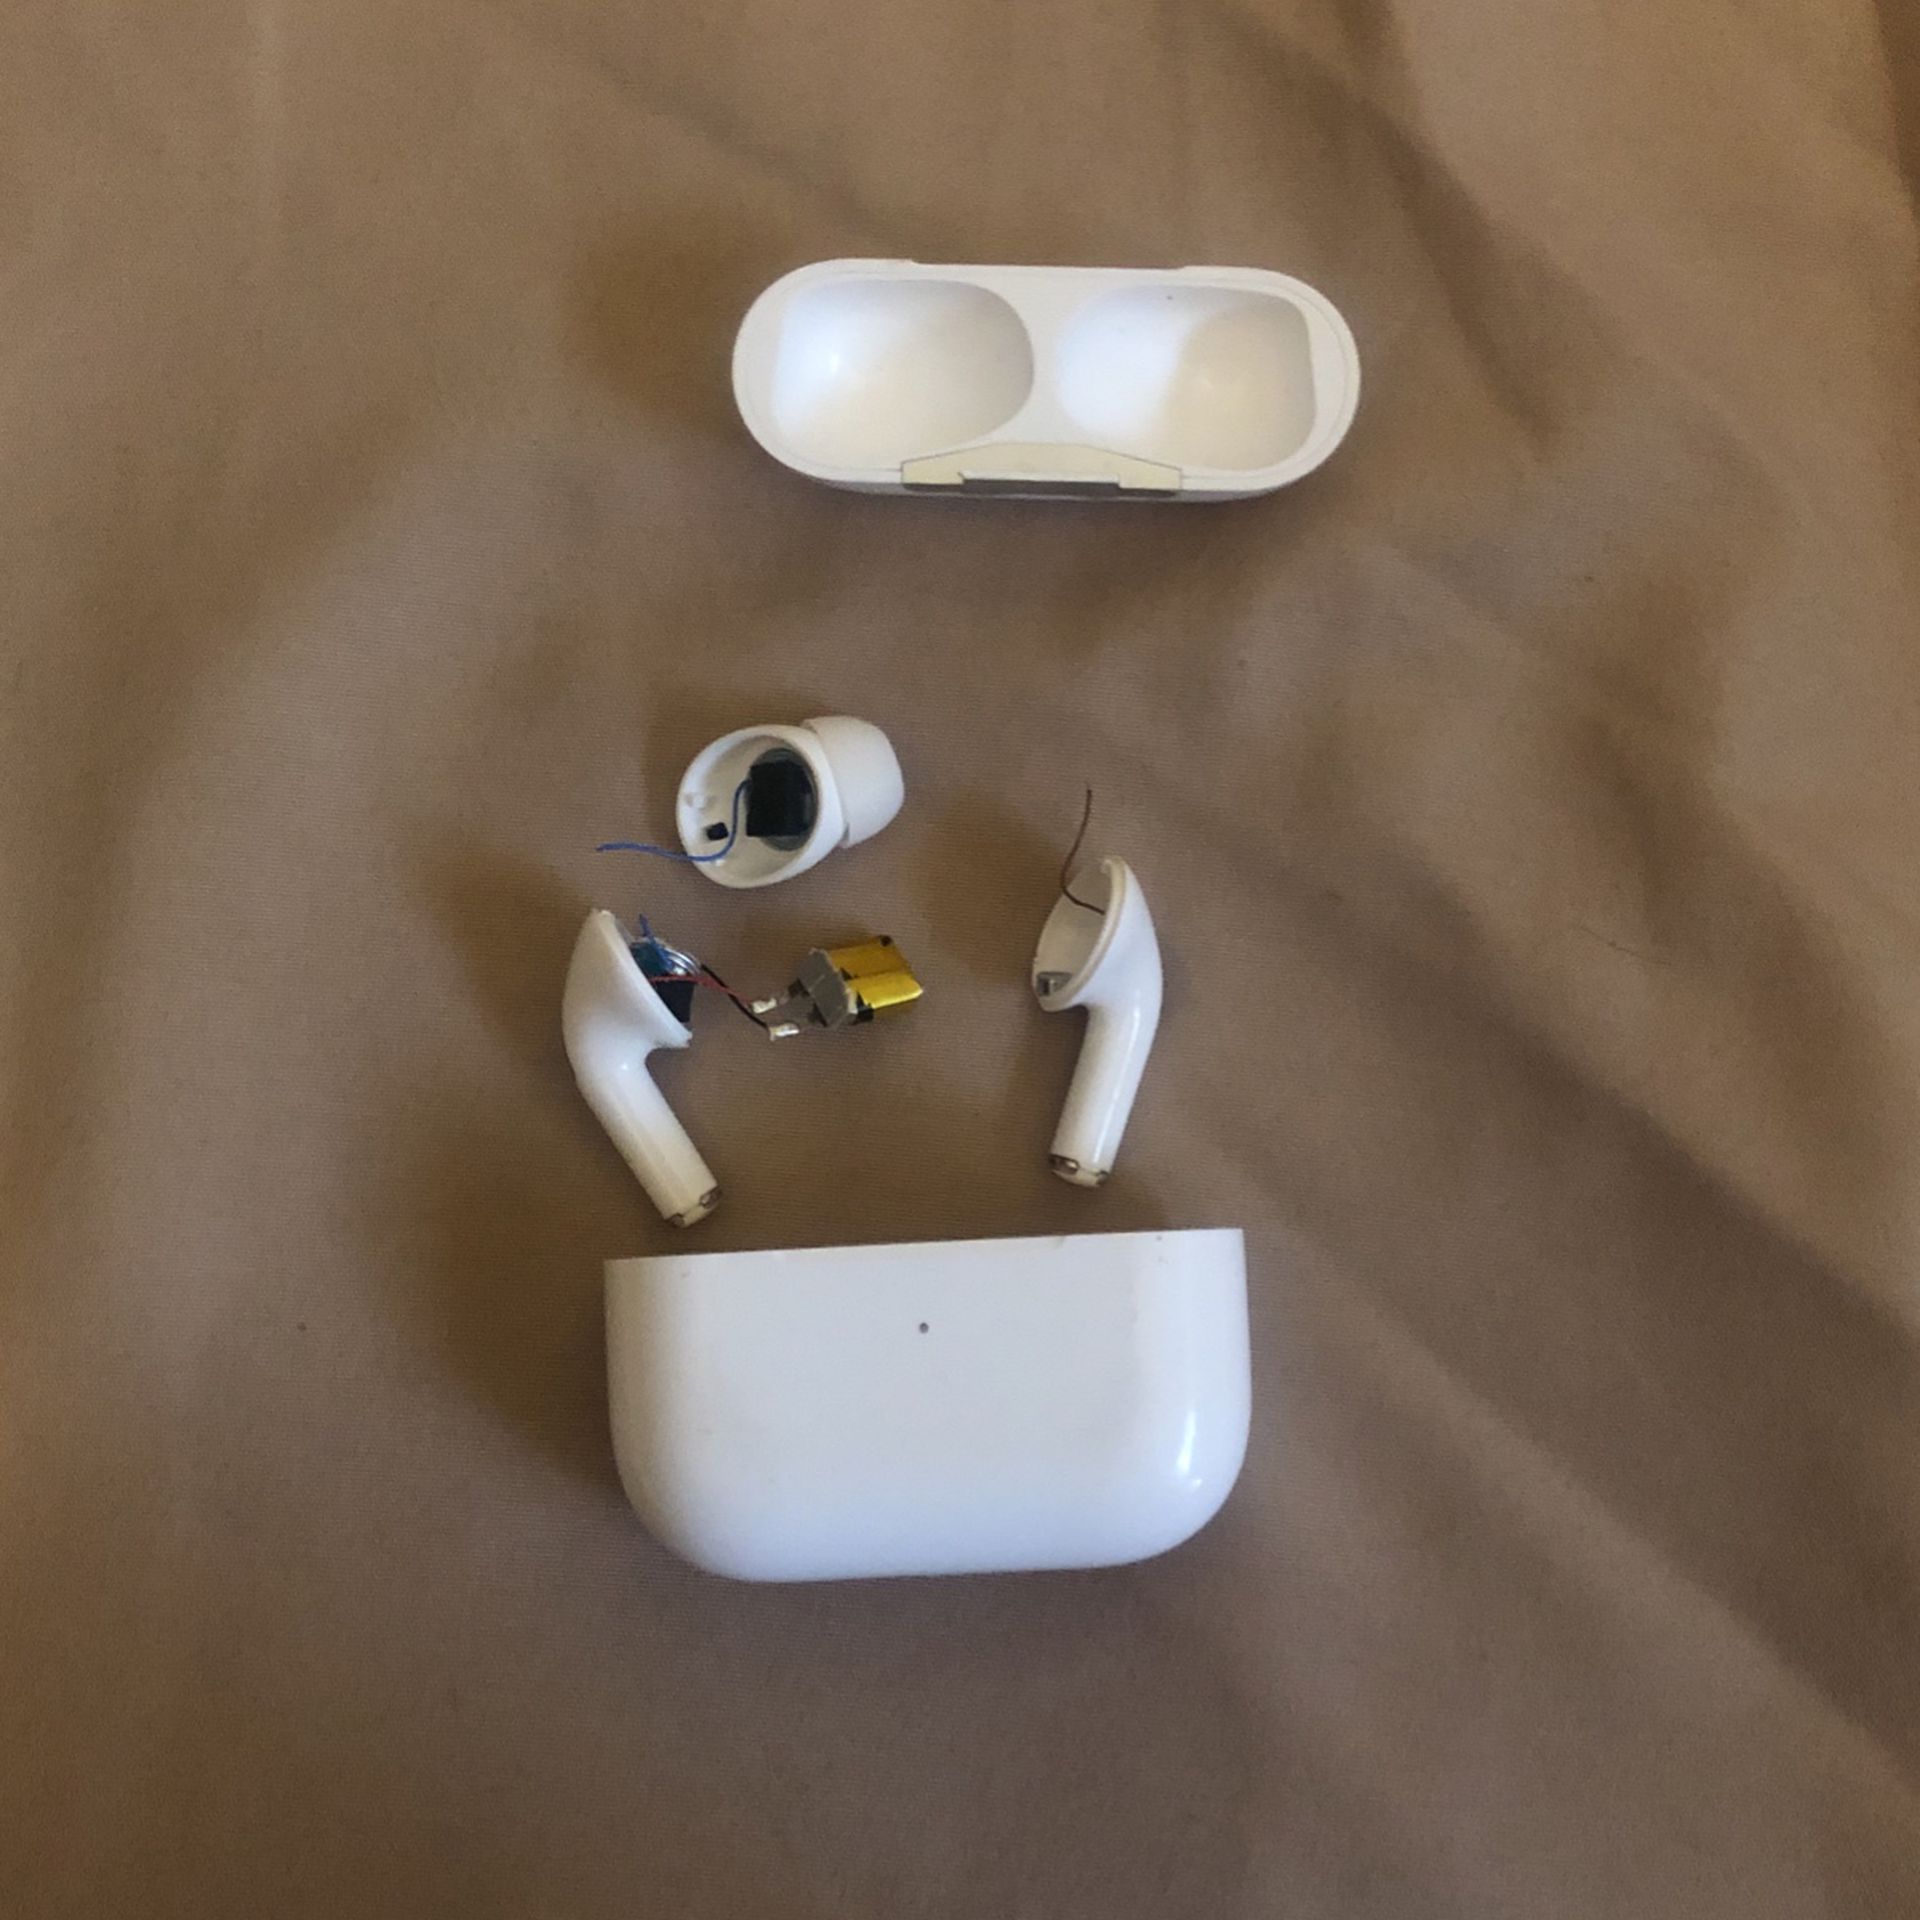 Limited Edition AirPod Pros (Perfected Condition!)